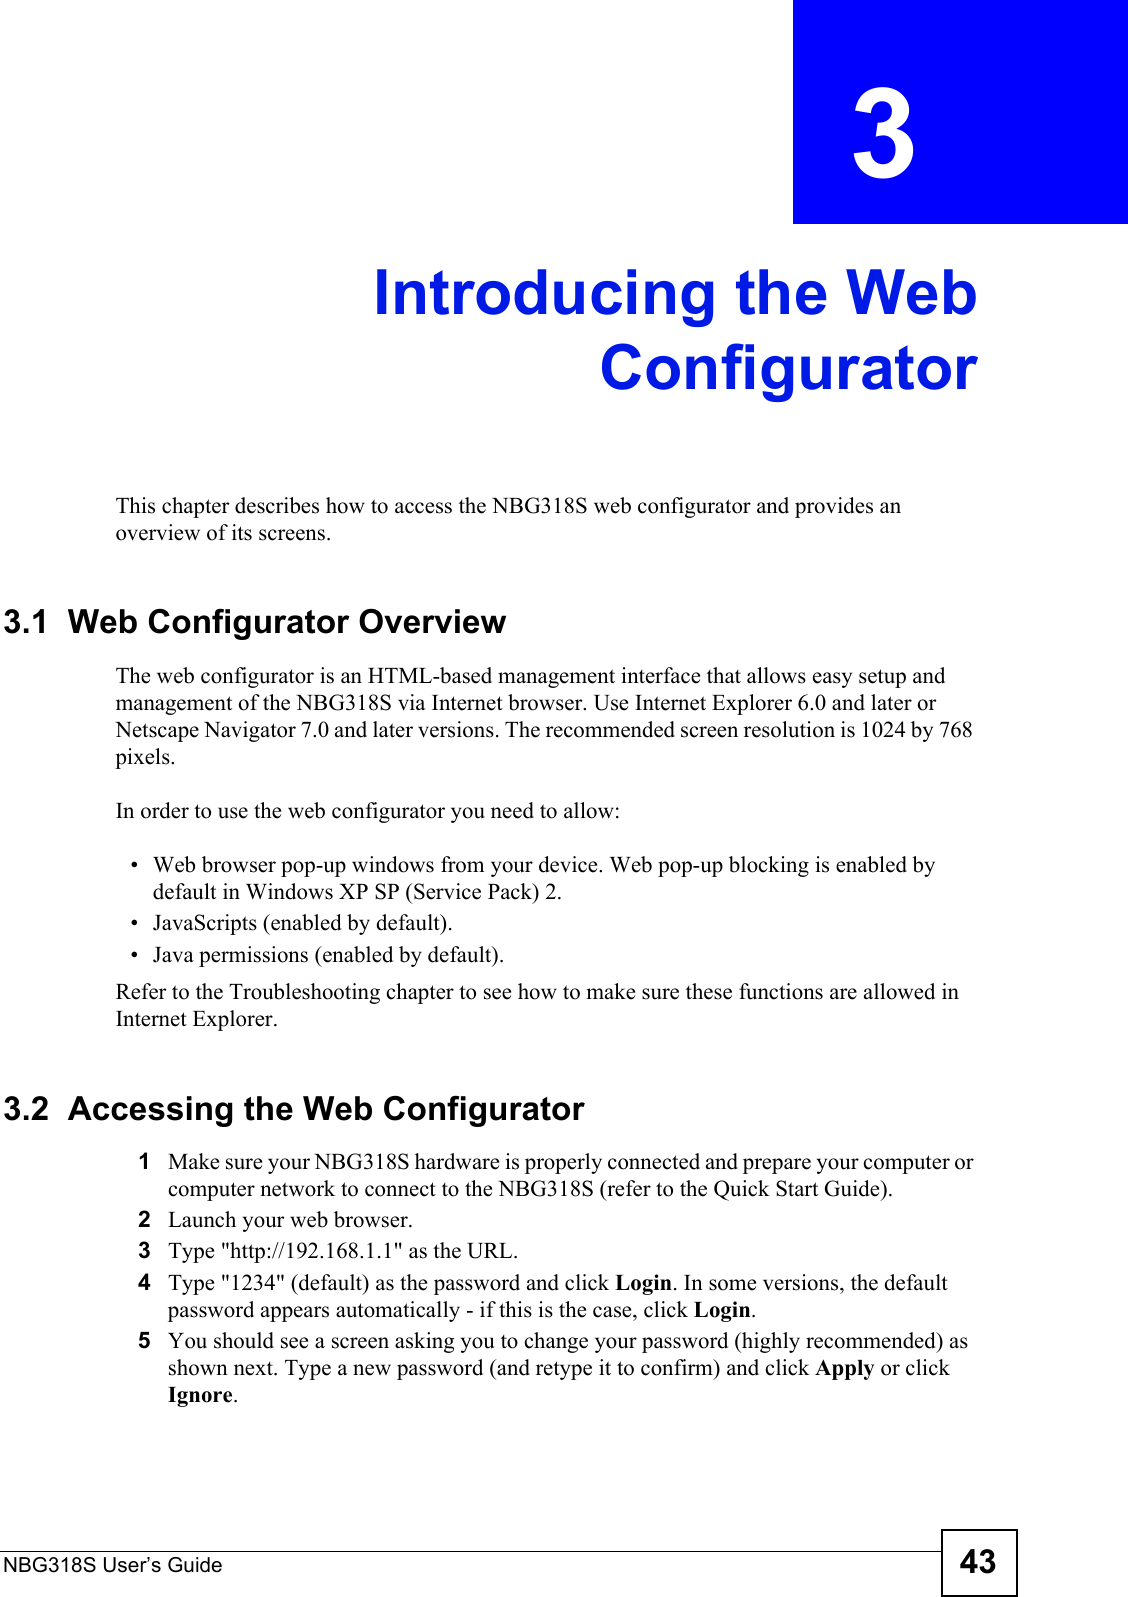 NBG318S User’s Guide 43CHAPTER  3 Introducing the WebConfiguratorThis chapter describes how to access the NBG318S web configurator and provides an overview of its screens.3.1  Web Configurator OverviewThe web configurator is an HTML-based management interface that allows easy setup and management of the NBG318S via Internet browser. Use Internet Explorer 6.0 and later or Netscape Navigator 7.0 and later versions. The recommended screen resolution is 1024 by 768 pixels.In order to use the web configurator you need to allow:• Web browser pop-up windows from your device. Web pop-up blocking is enabled by default in Windows XP SP (Service Pack) 2.• JavaScripts (enabled by default).• Java permissions (enabled by default).Refer to the Troubleshooting chapter to see how to make sure these functions are allowed in Internet Explorer.3.2  Accessing the Web Configurator1Make sure your NBG318S hardware is properly connected and prepare your computer or computer network to connect to the NBG318S (refer to the Quick Start Guide).2Launch your web browser.3Type &quot;http://192.168.1.1&quot; as the URL.4Type &quot;1234&quot; (default) as the password and click Login. In some versions, the default password appears automatically - if this is the case, click Login.5You should see a screen asking you to change your password (highly recommended) as shown next. Type a new password (and retype it to confirm) and click Apply or click Ignore.